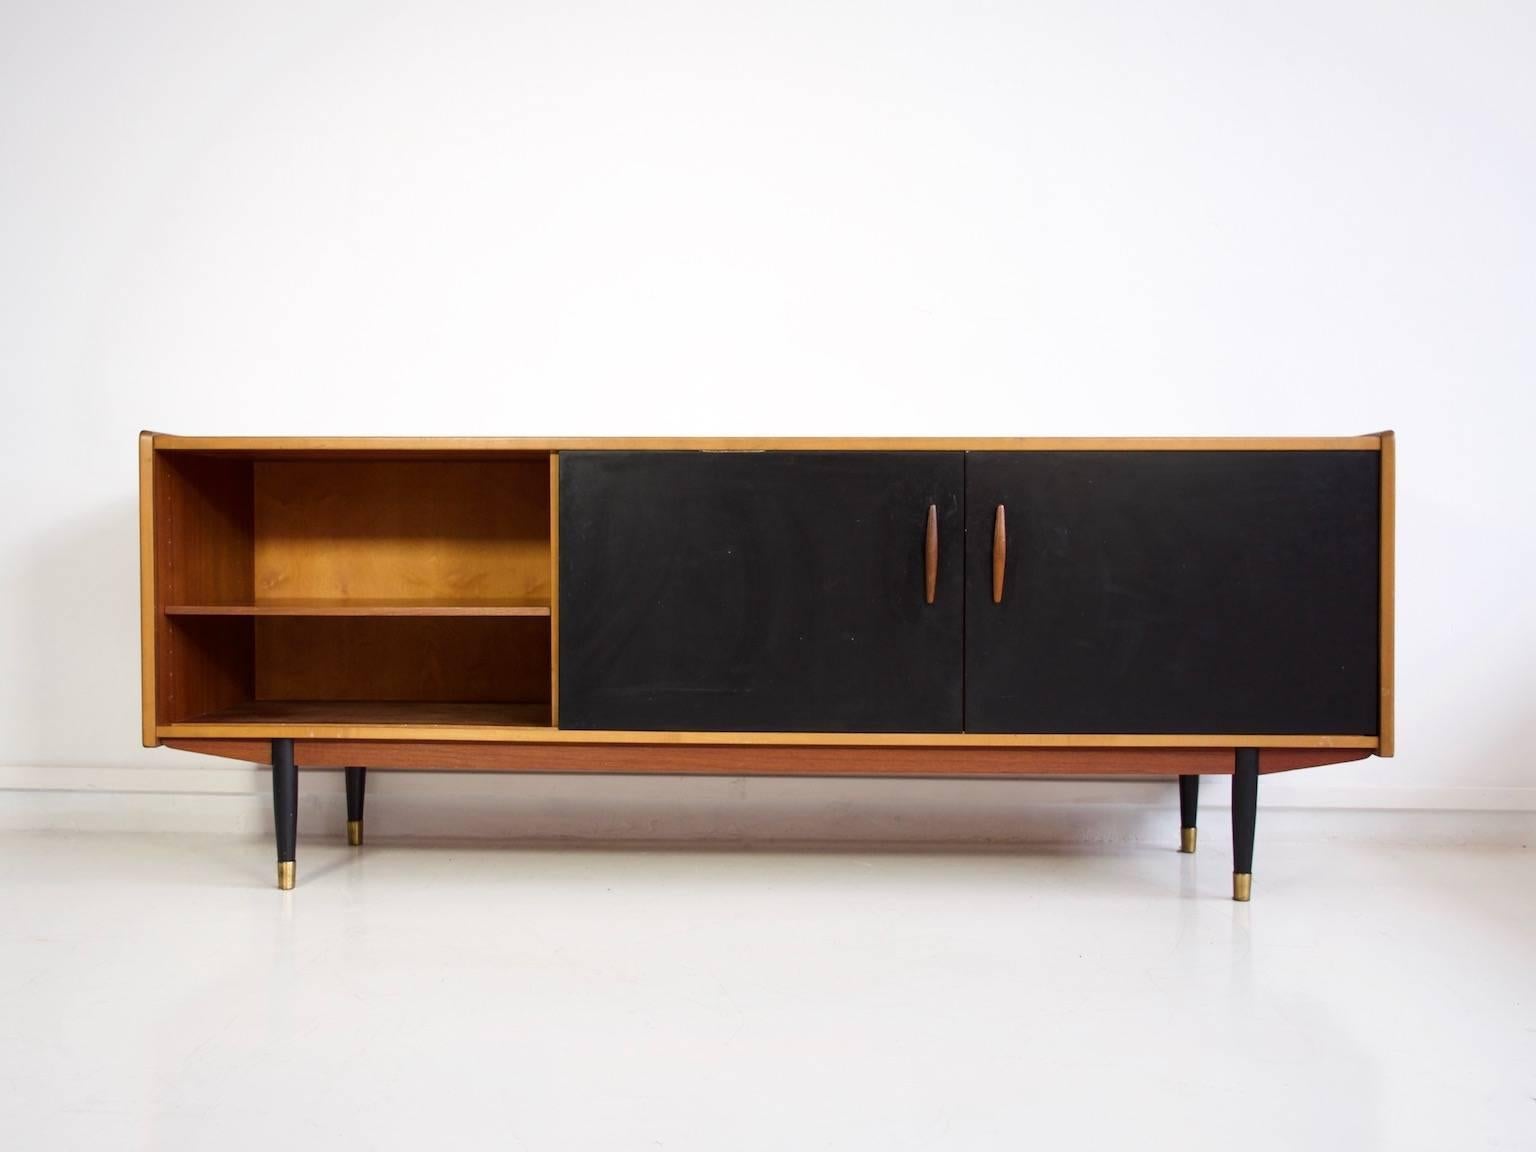 Teak sideboard by H. Troeds with five drawers in the middle and black laminate covered sliding doors on the sides, behind which are drawers. Feet with brass shoes, circa 1960s.